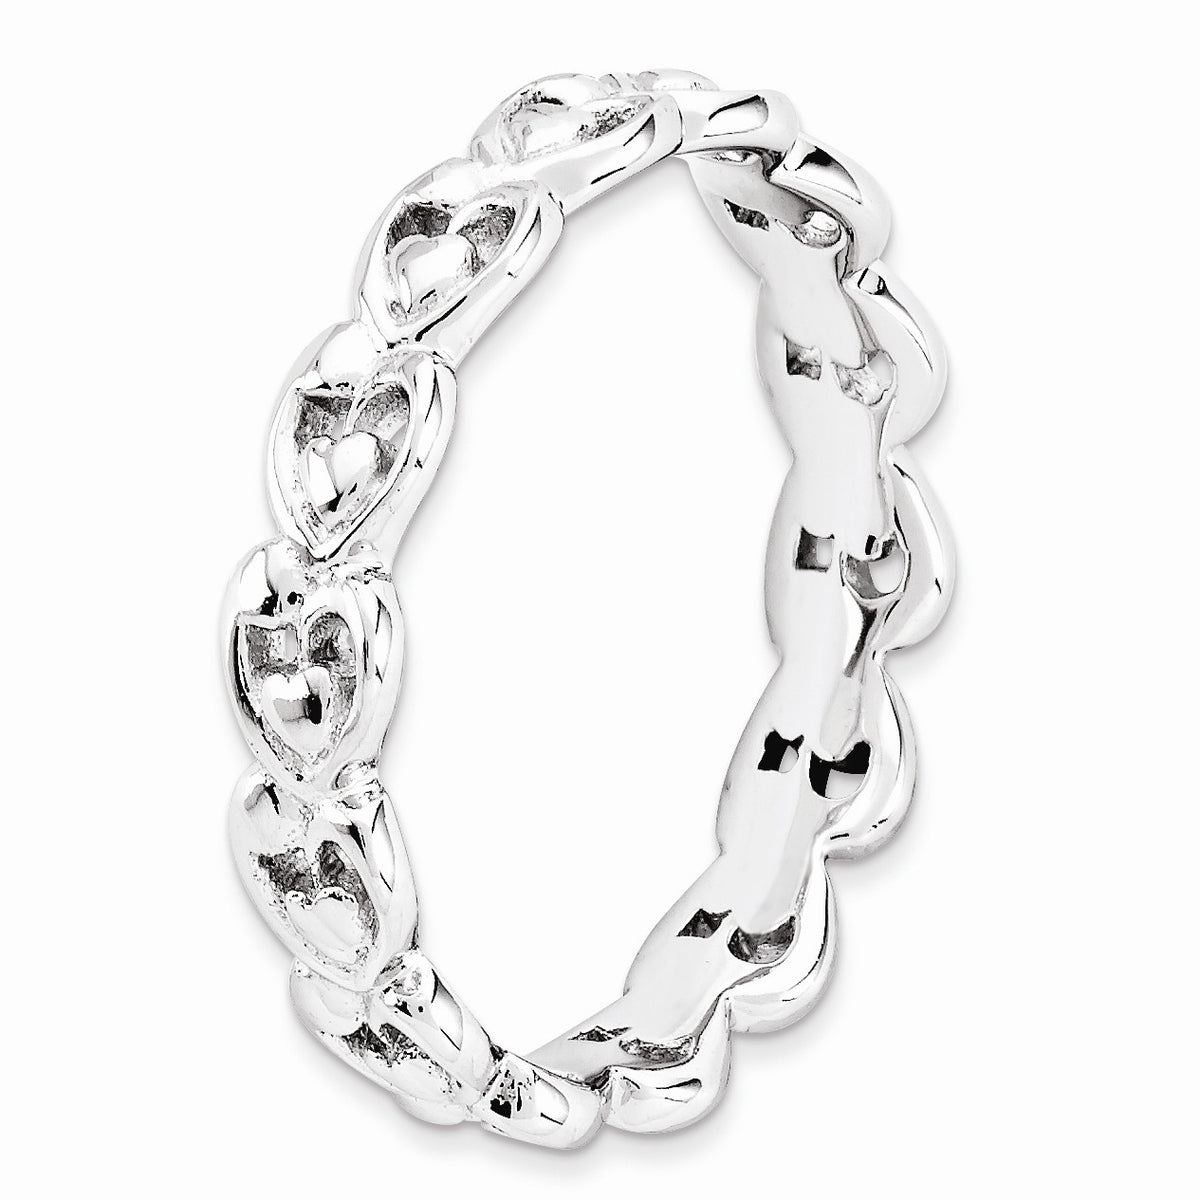 Alternate view of the Rhodium Plated Sterling Silver Stackable 4.5mm Heart Band by The Black Bow Jewelry Co.